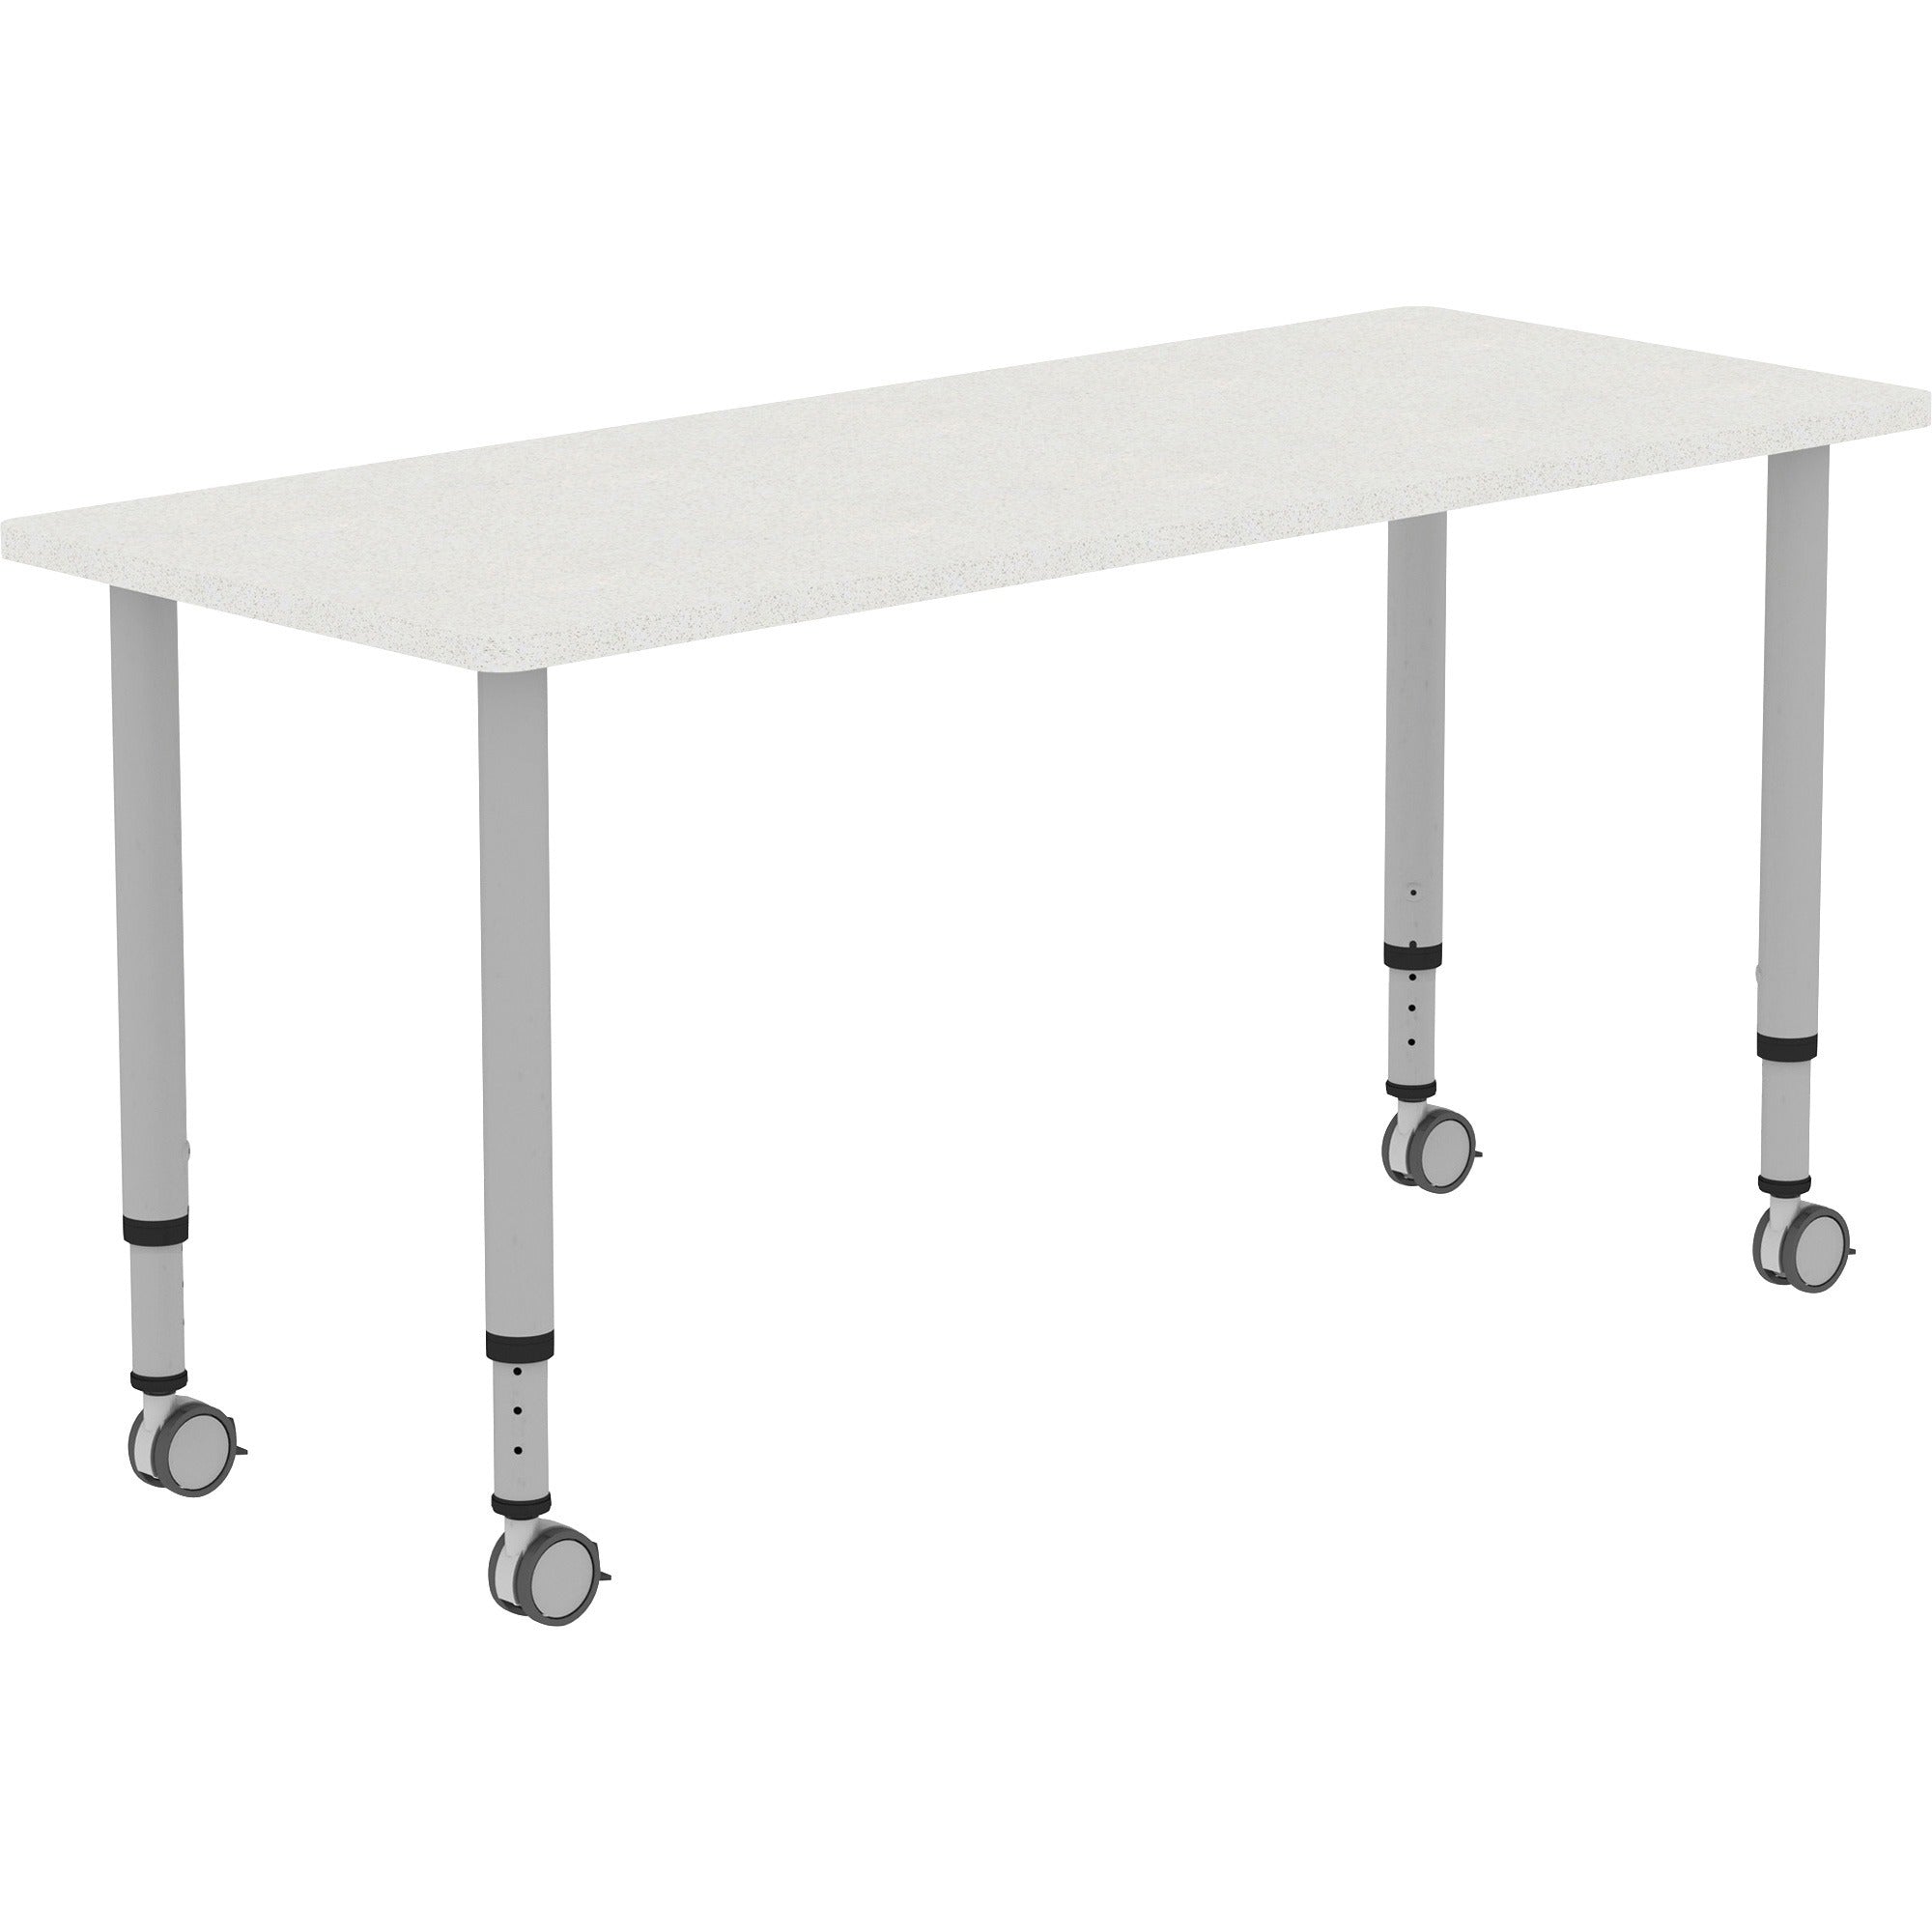 lorell-attune-height-adjustable-multipurpose-rectangular-table-for-table-toprectangle-top-adjustable-height-2662-to-3362-adjustment-x-60-table-top-width-x-2362-table-top-depth-3362-height-assembly-required-laminated-gray-lam_llr69579 - 1